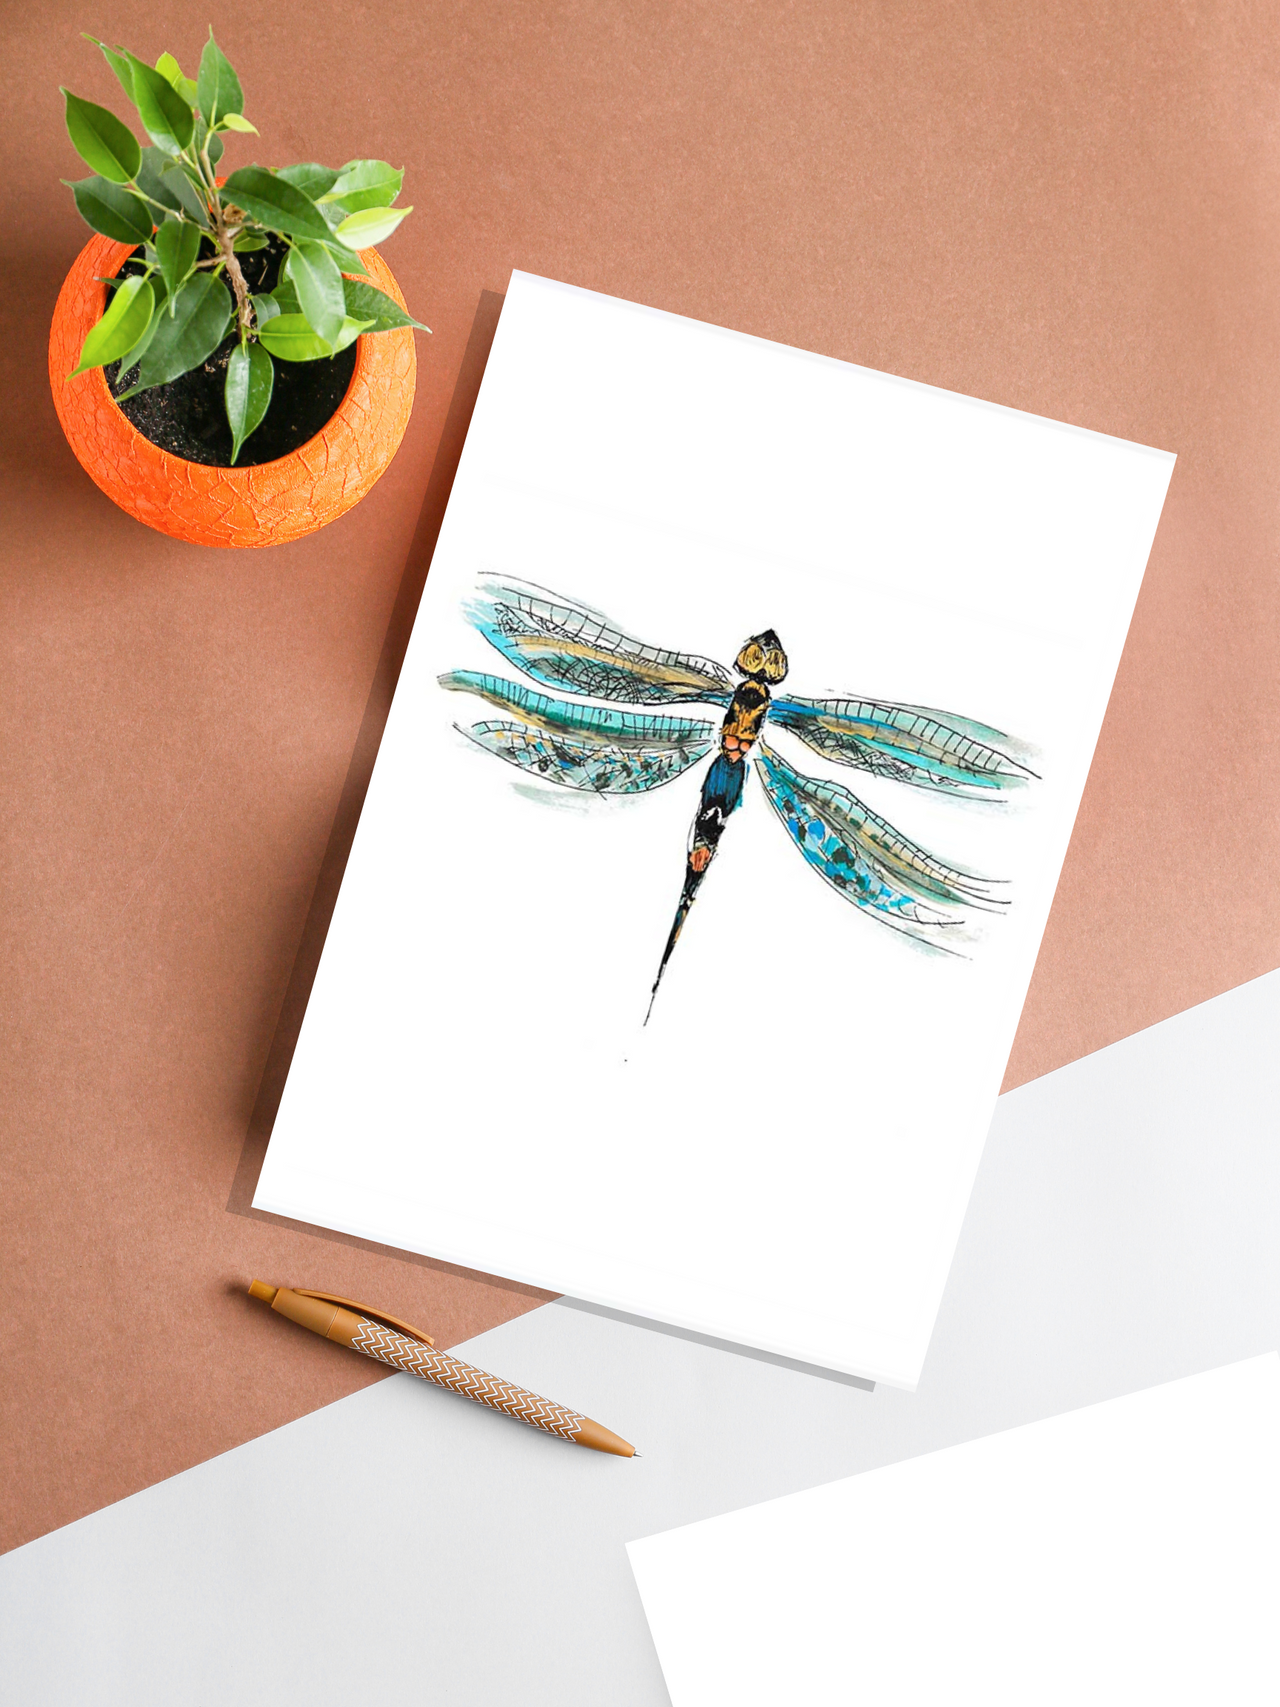 dragonfly art print on table